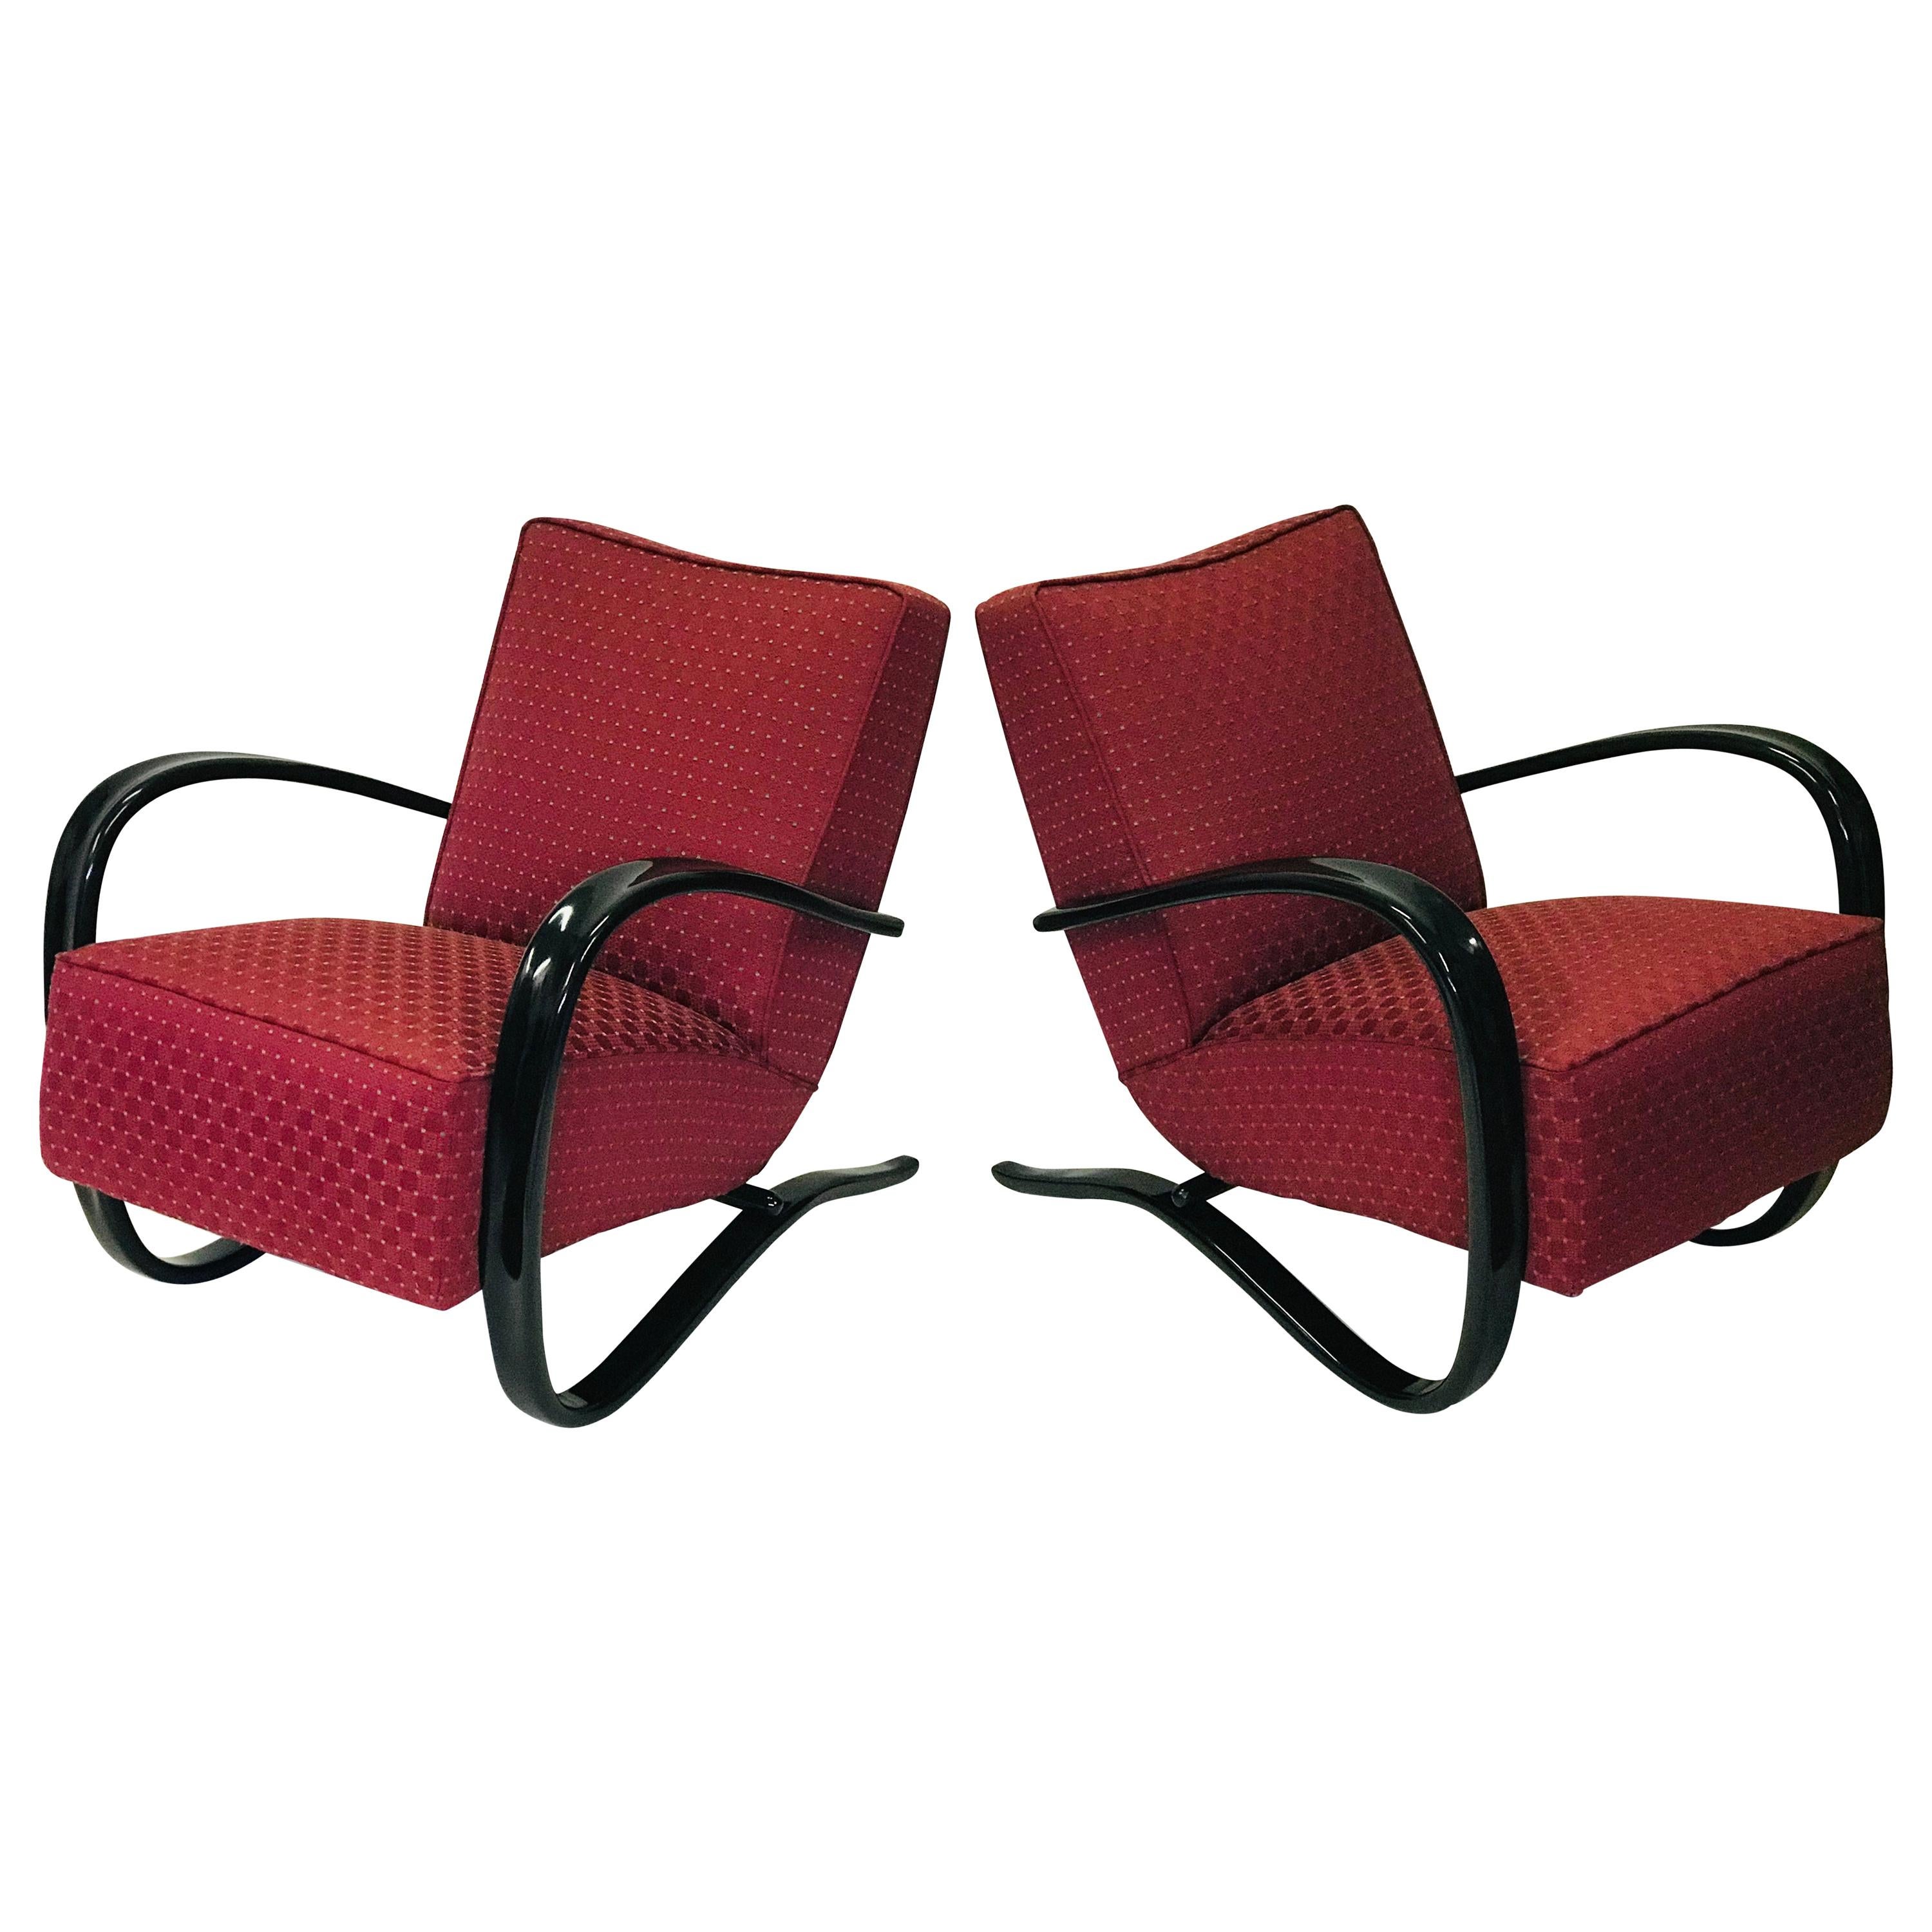 Pair of Armchairs by J. Halabala 1930, Model H-269 For Sale